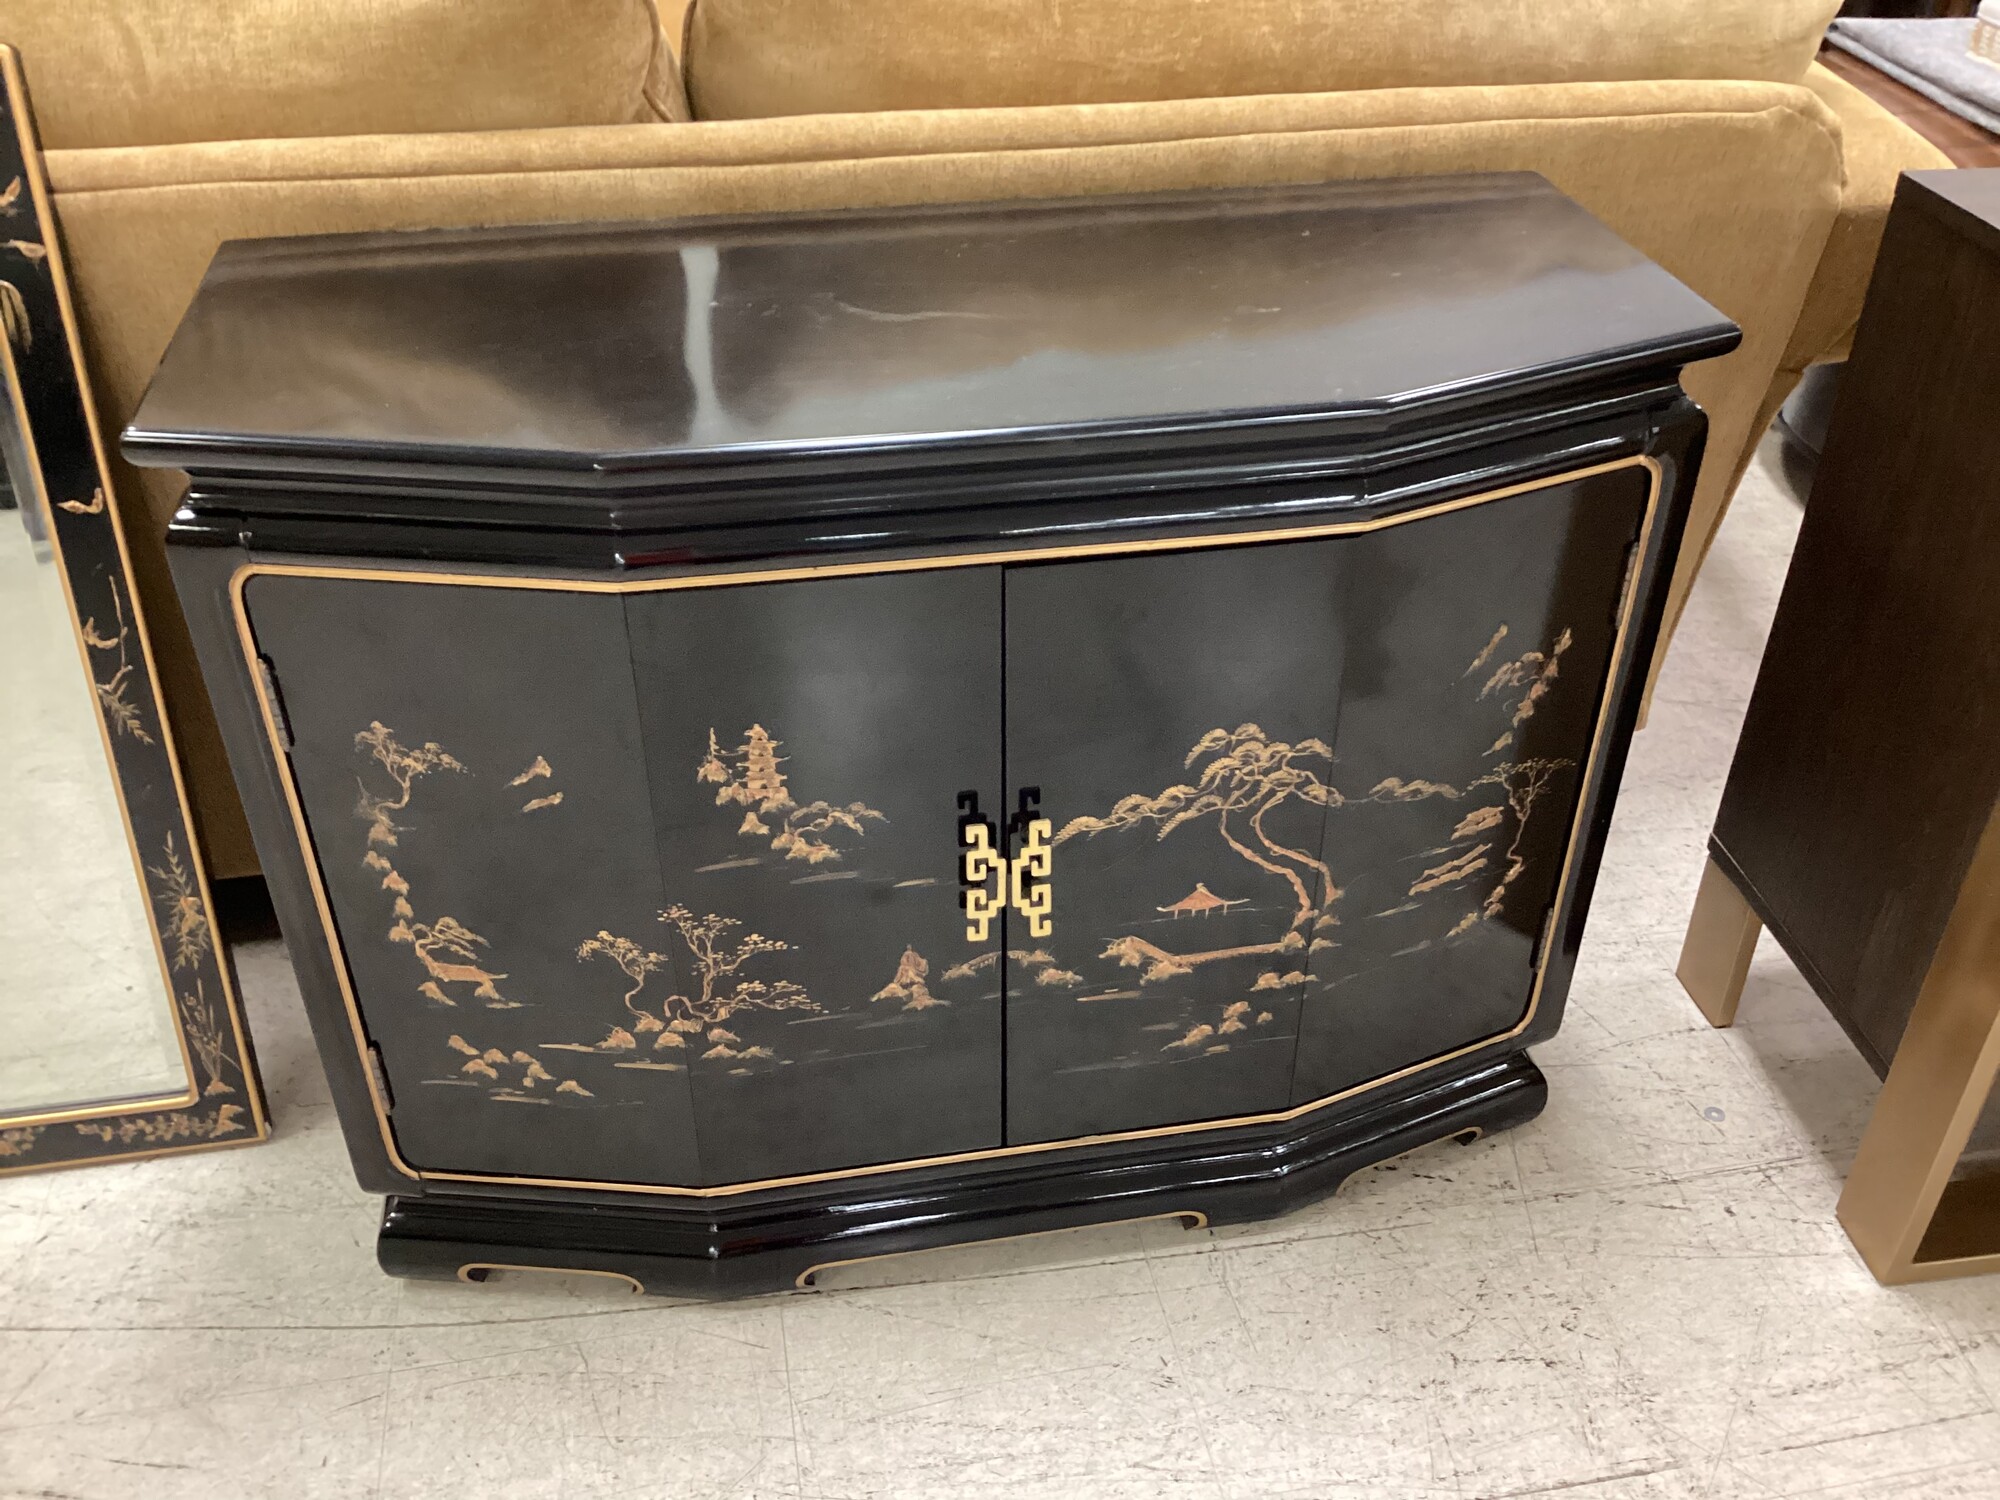 Black Asian Cabinet, Blk/Gld, 2 Doors
40in wide x 16in deep x 30in tall